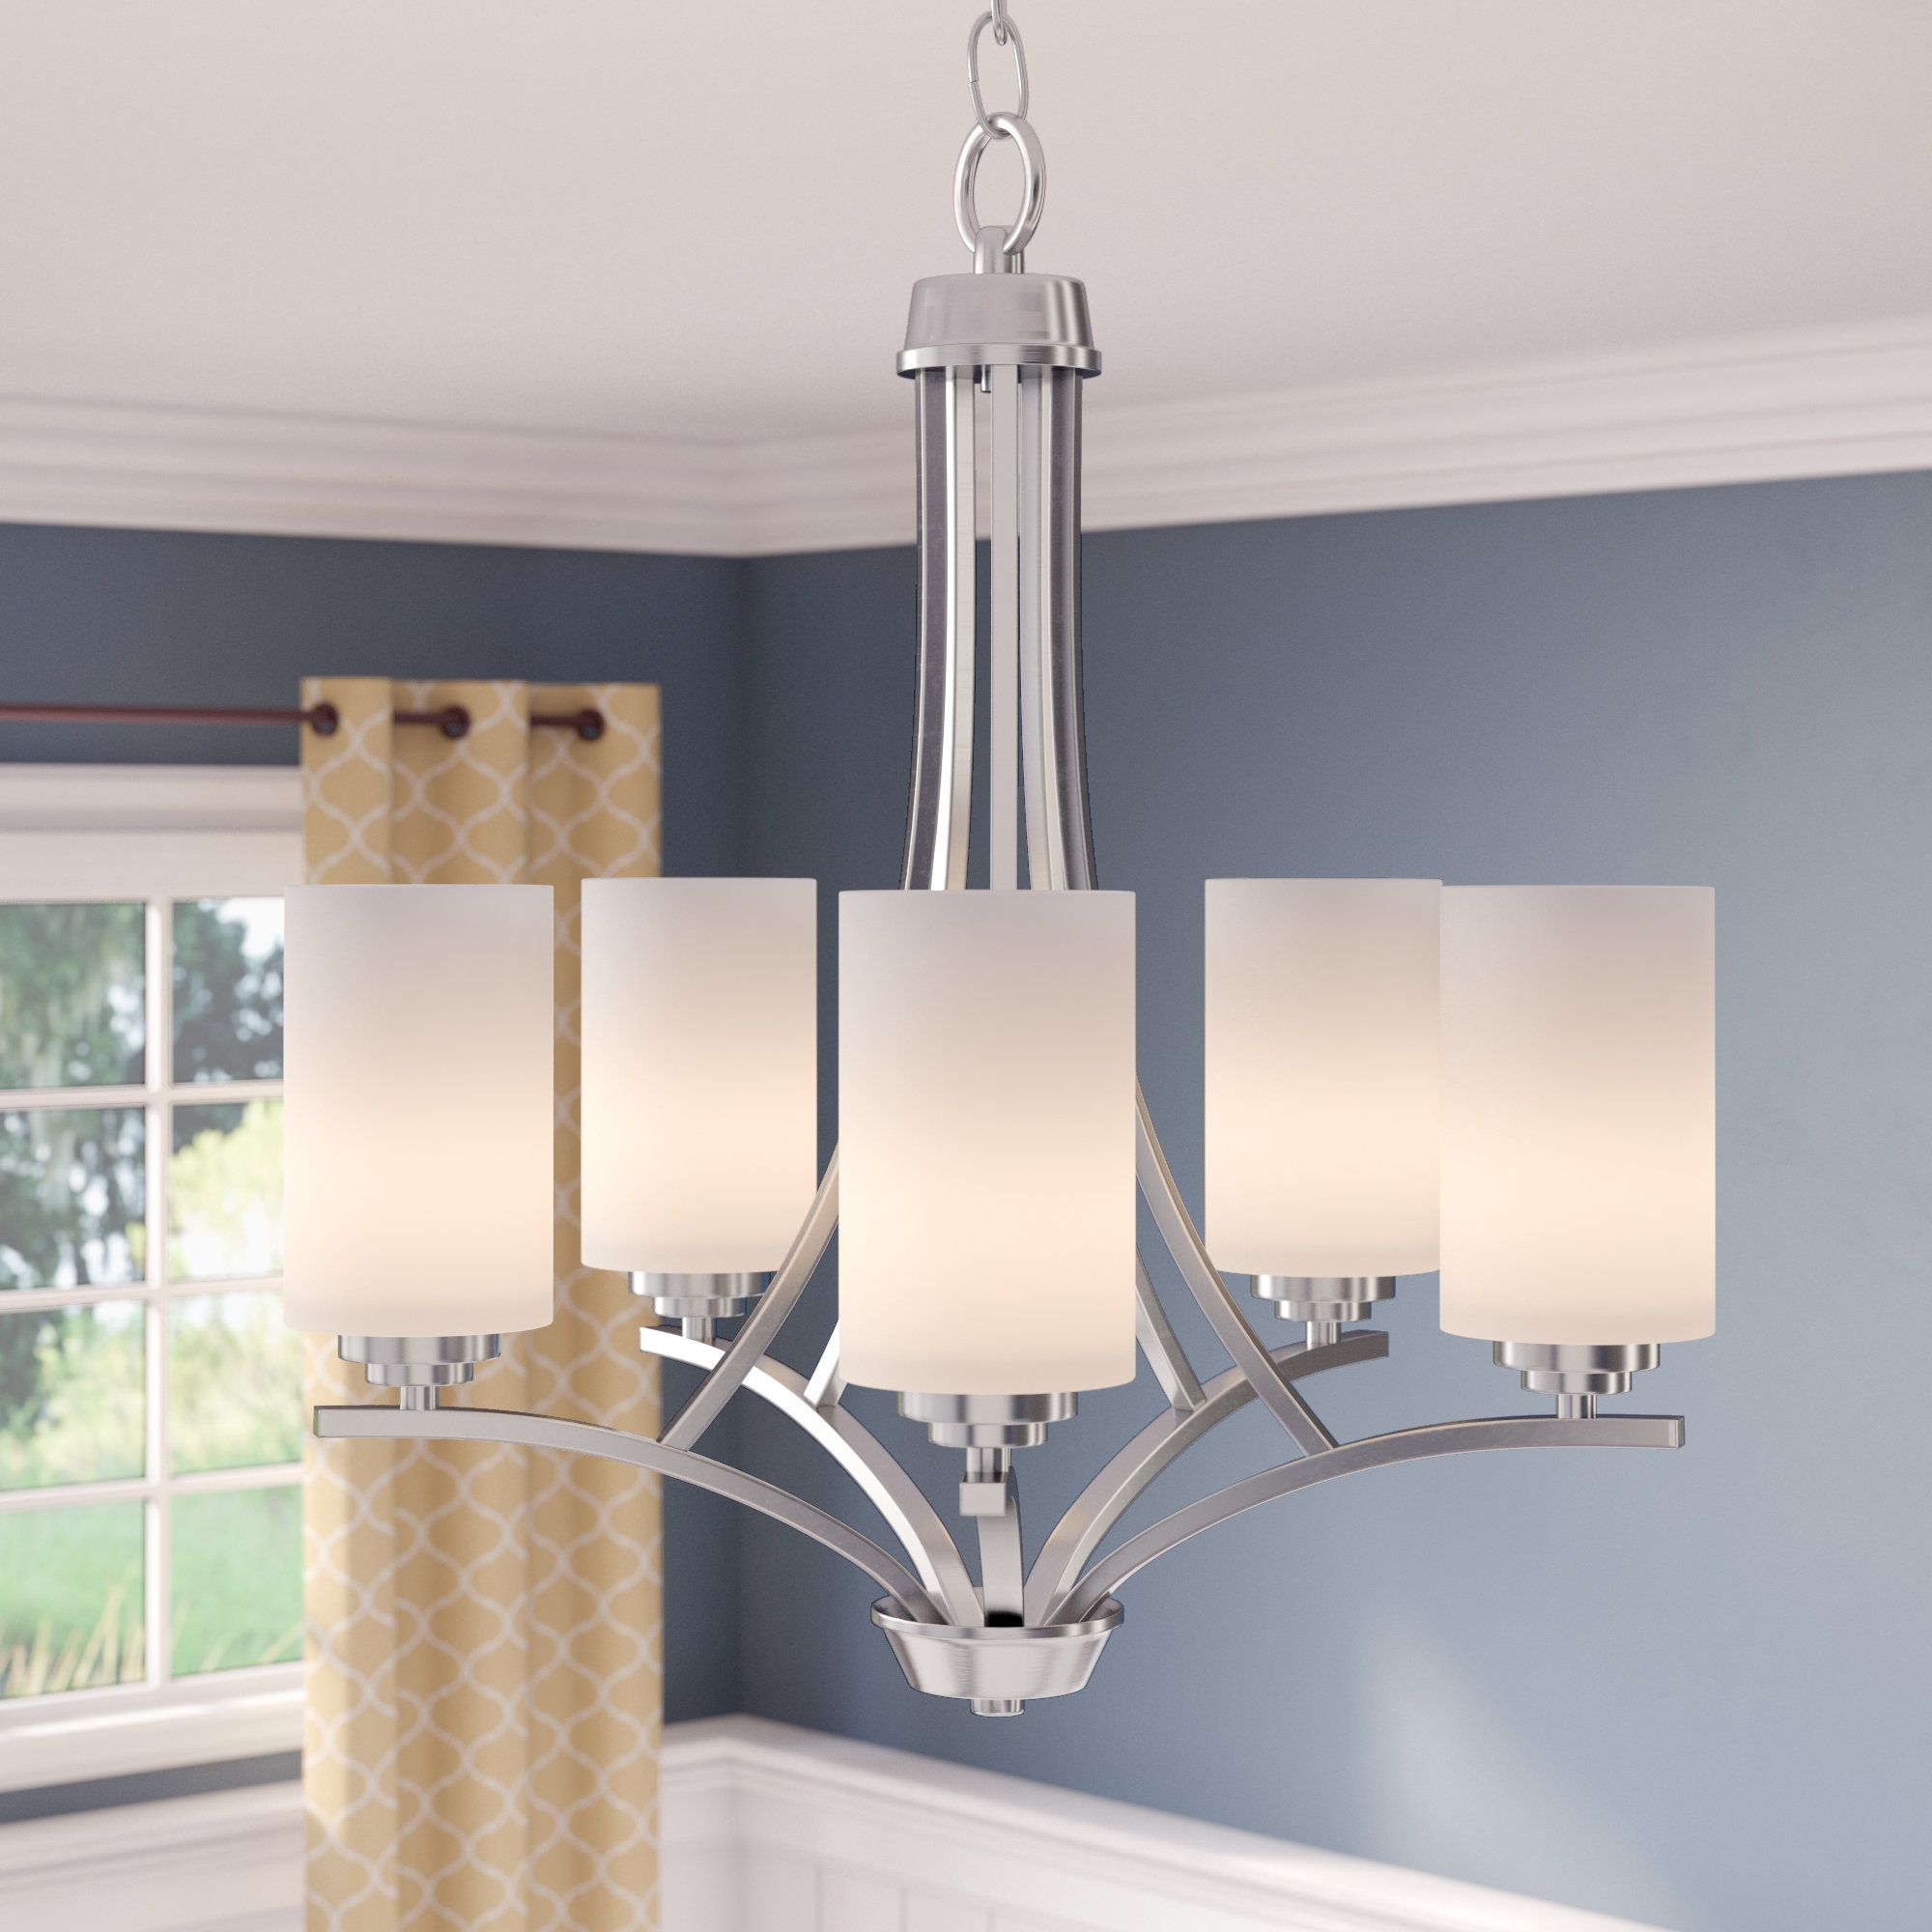 Bainsby 5 Light Shaded Chandelier With Vincent 5 Light Drum Chandeliers (View 12 of 30)